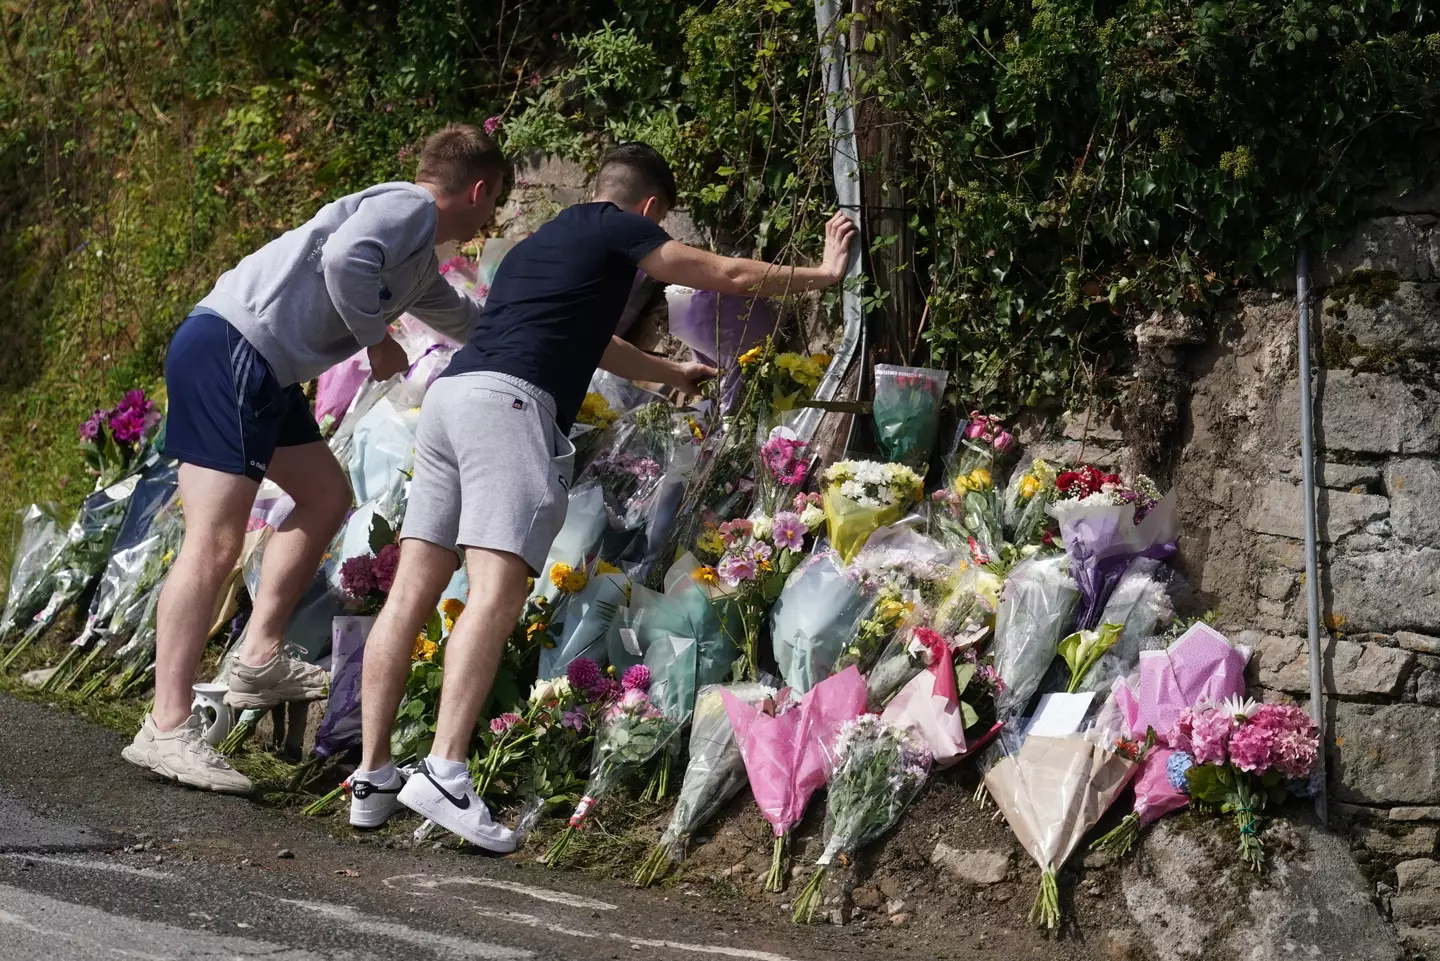 Tributes were laid at the scene.